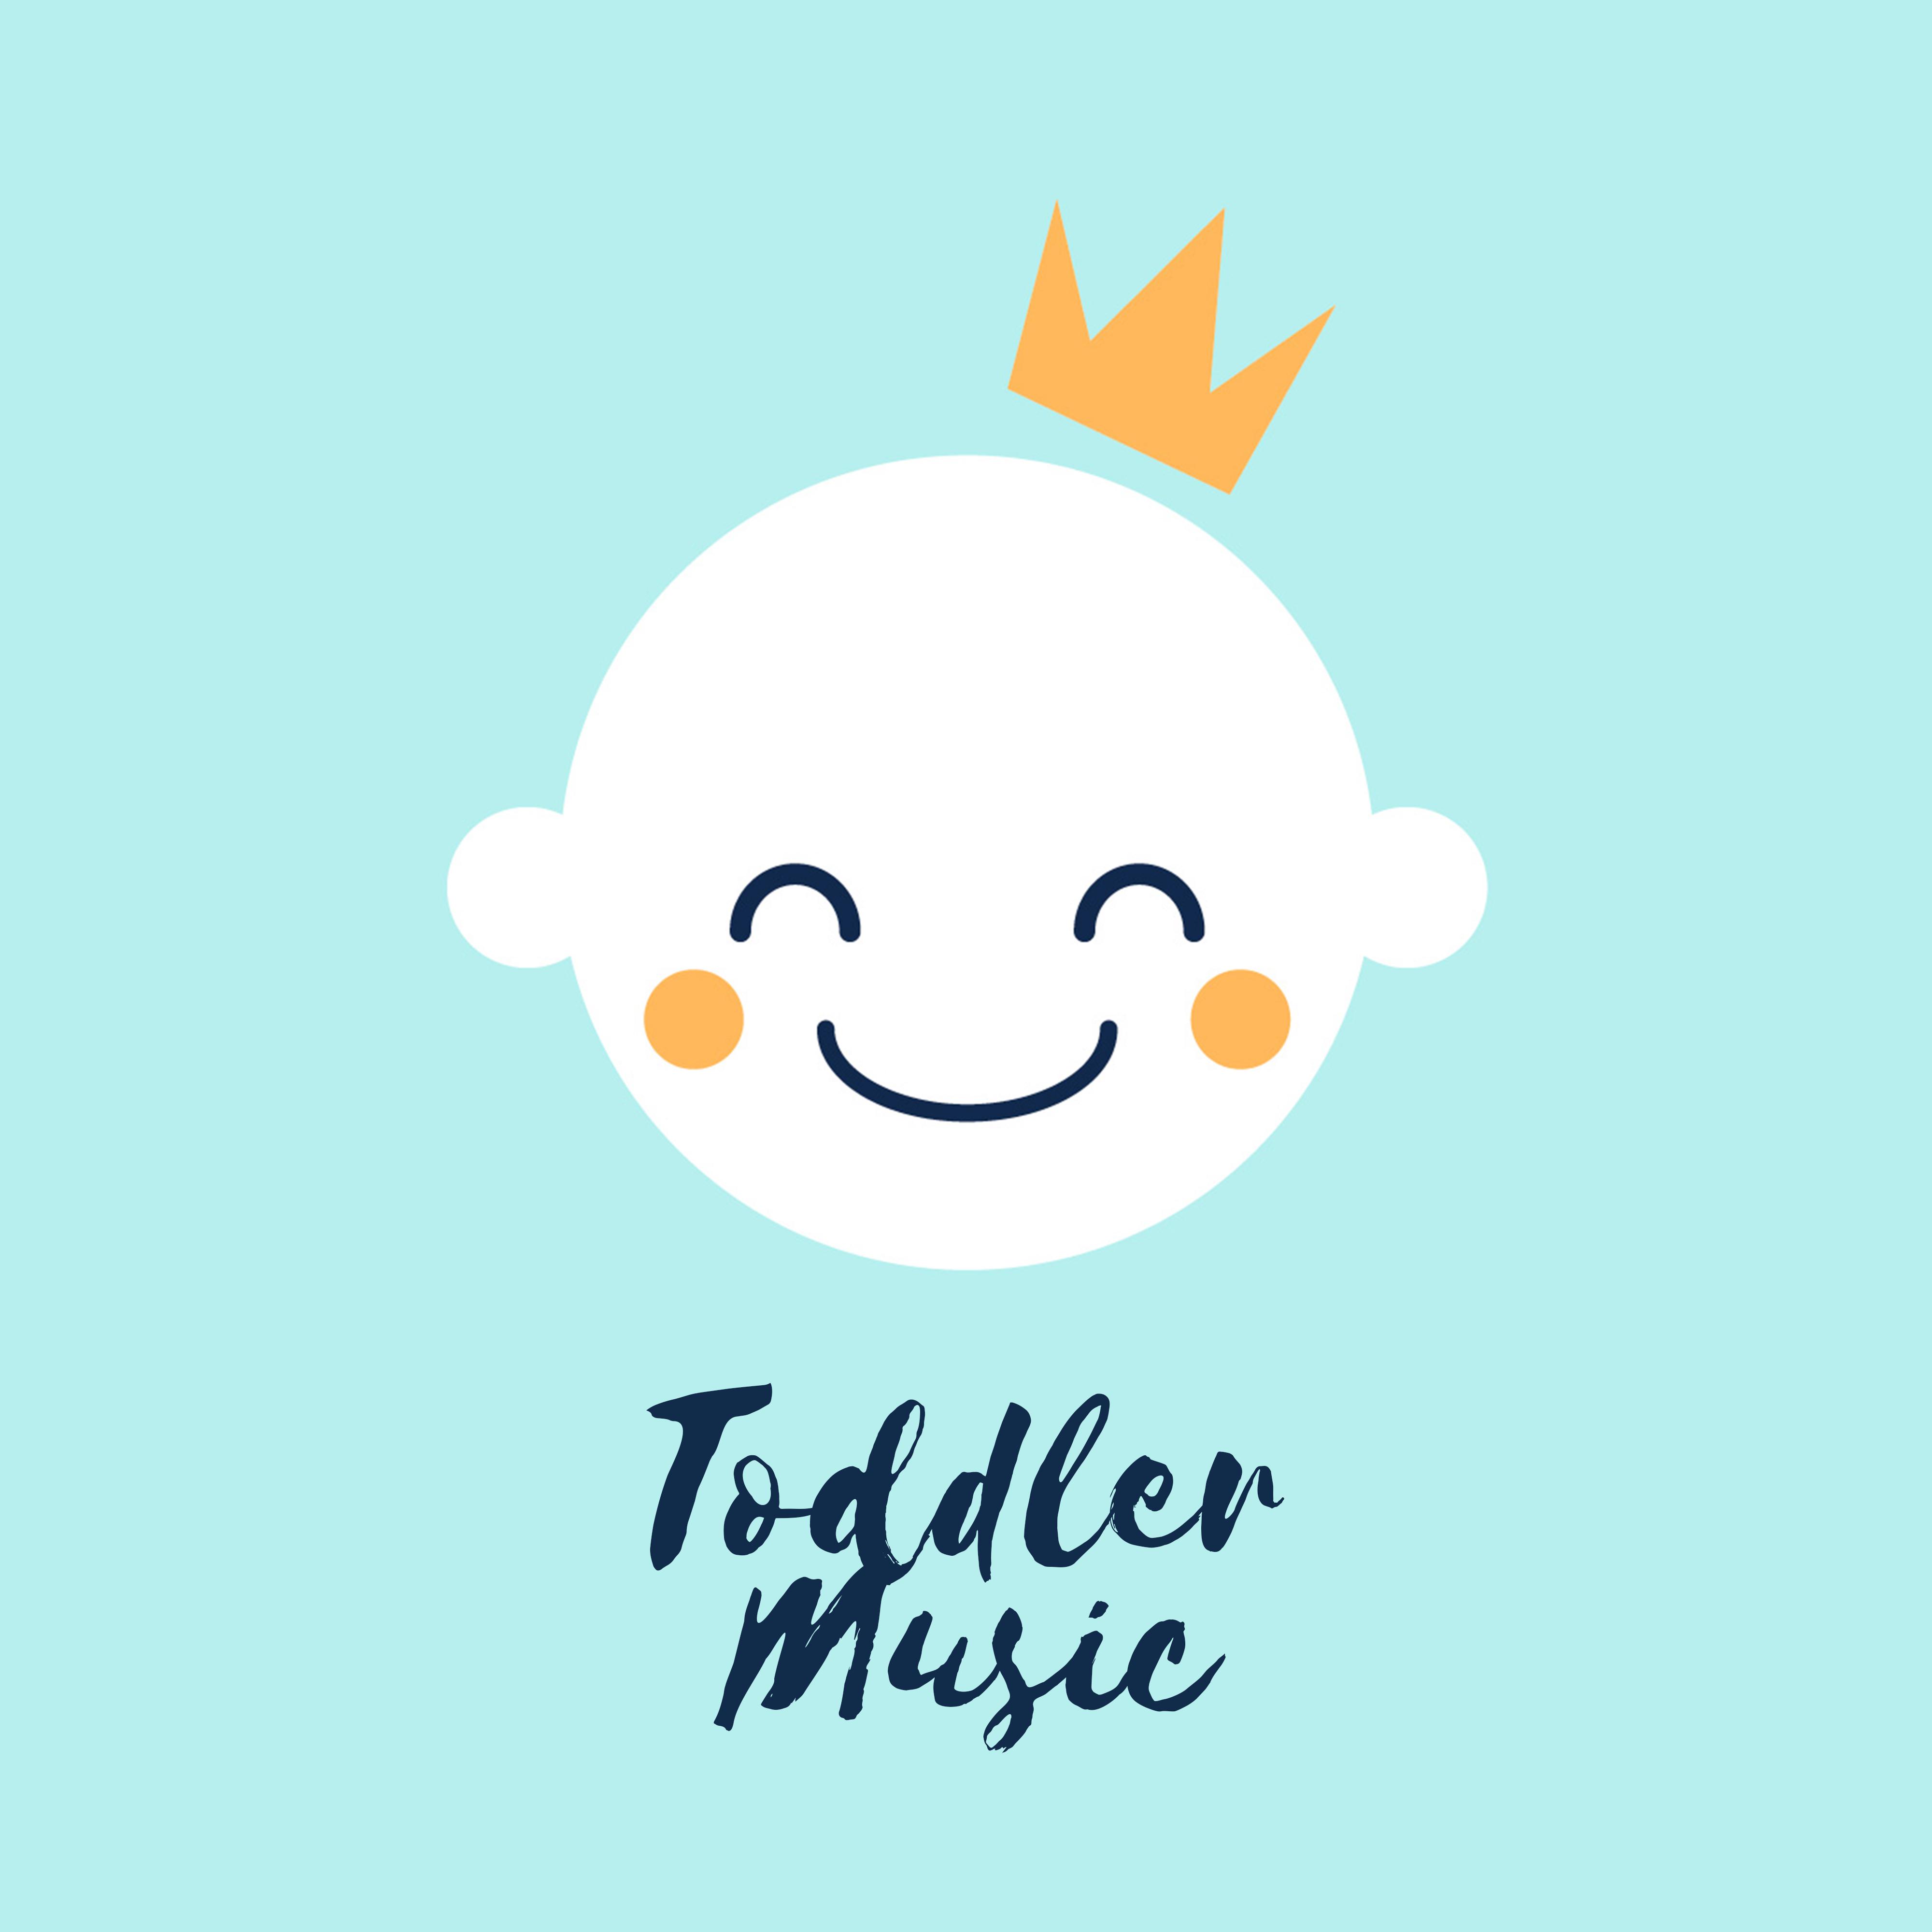 Toddler Music: Relaxing Nature Sounds for Baby, Soothing Lullabies, Nature Music for Kids, Calm Sleep, Music Zone, Lounge, Baby Music